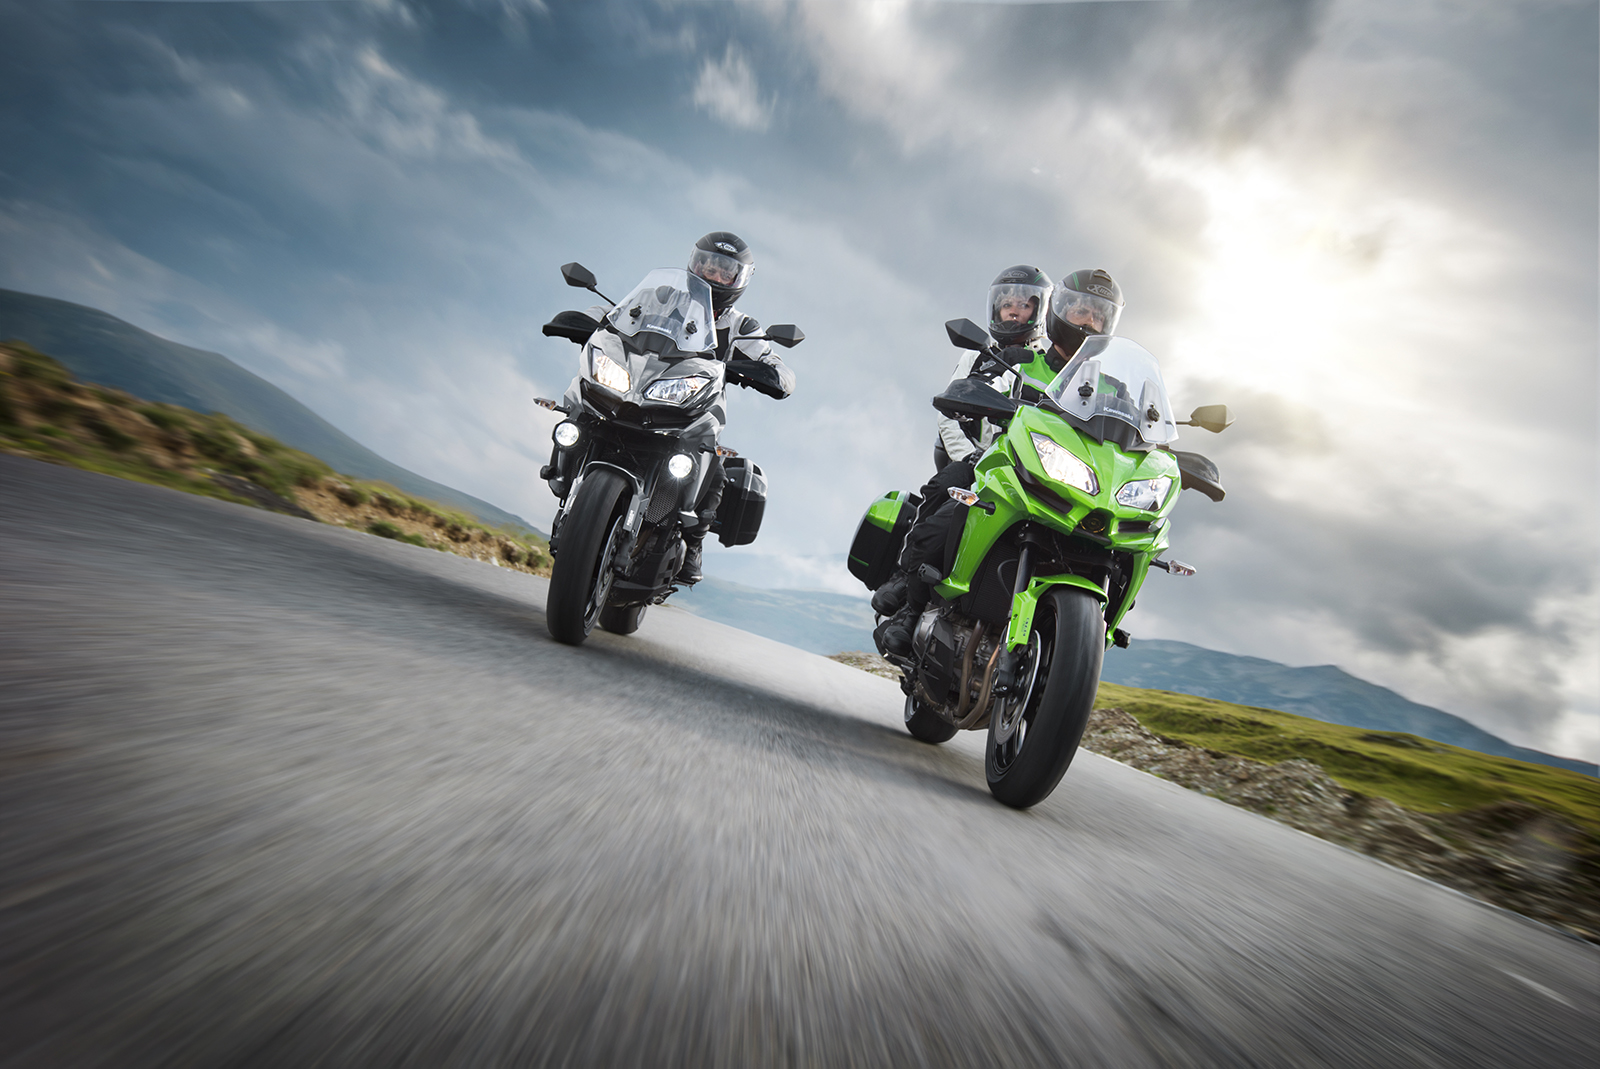 Kawasaki Z1000SX gets slipper clutch and standard ABS for 2016